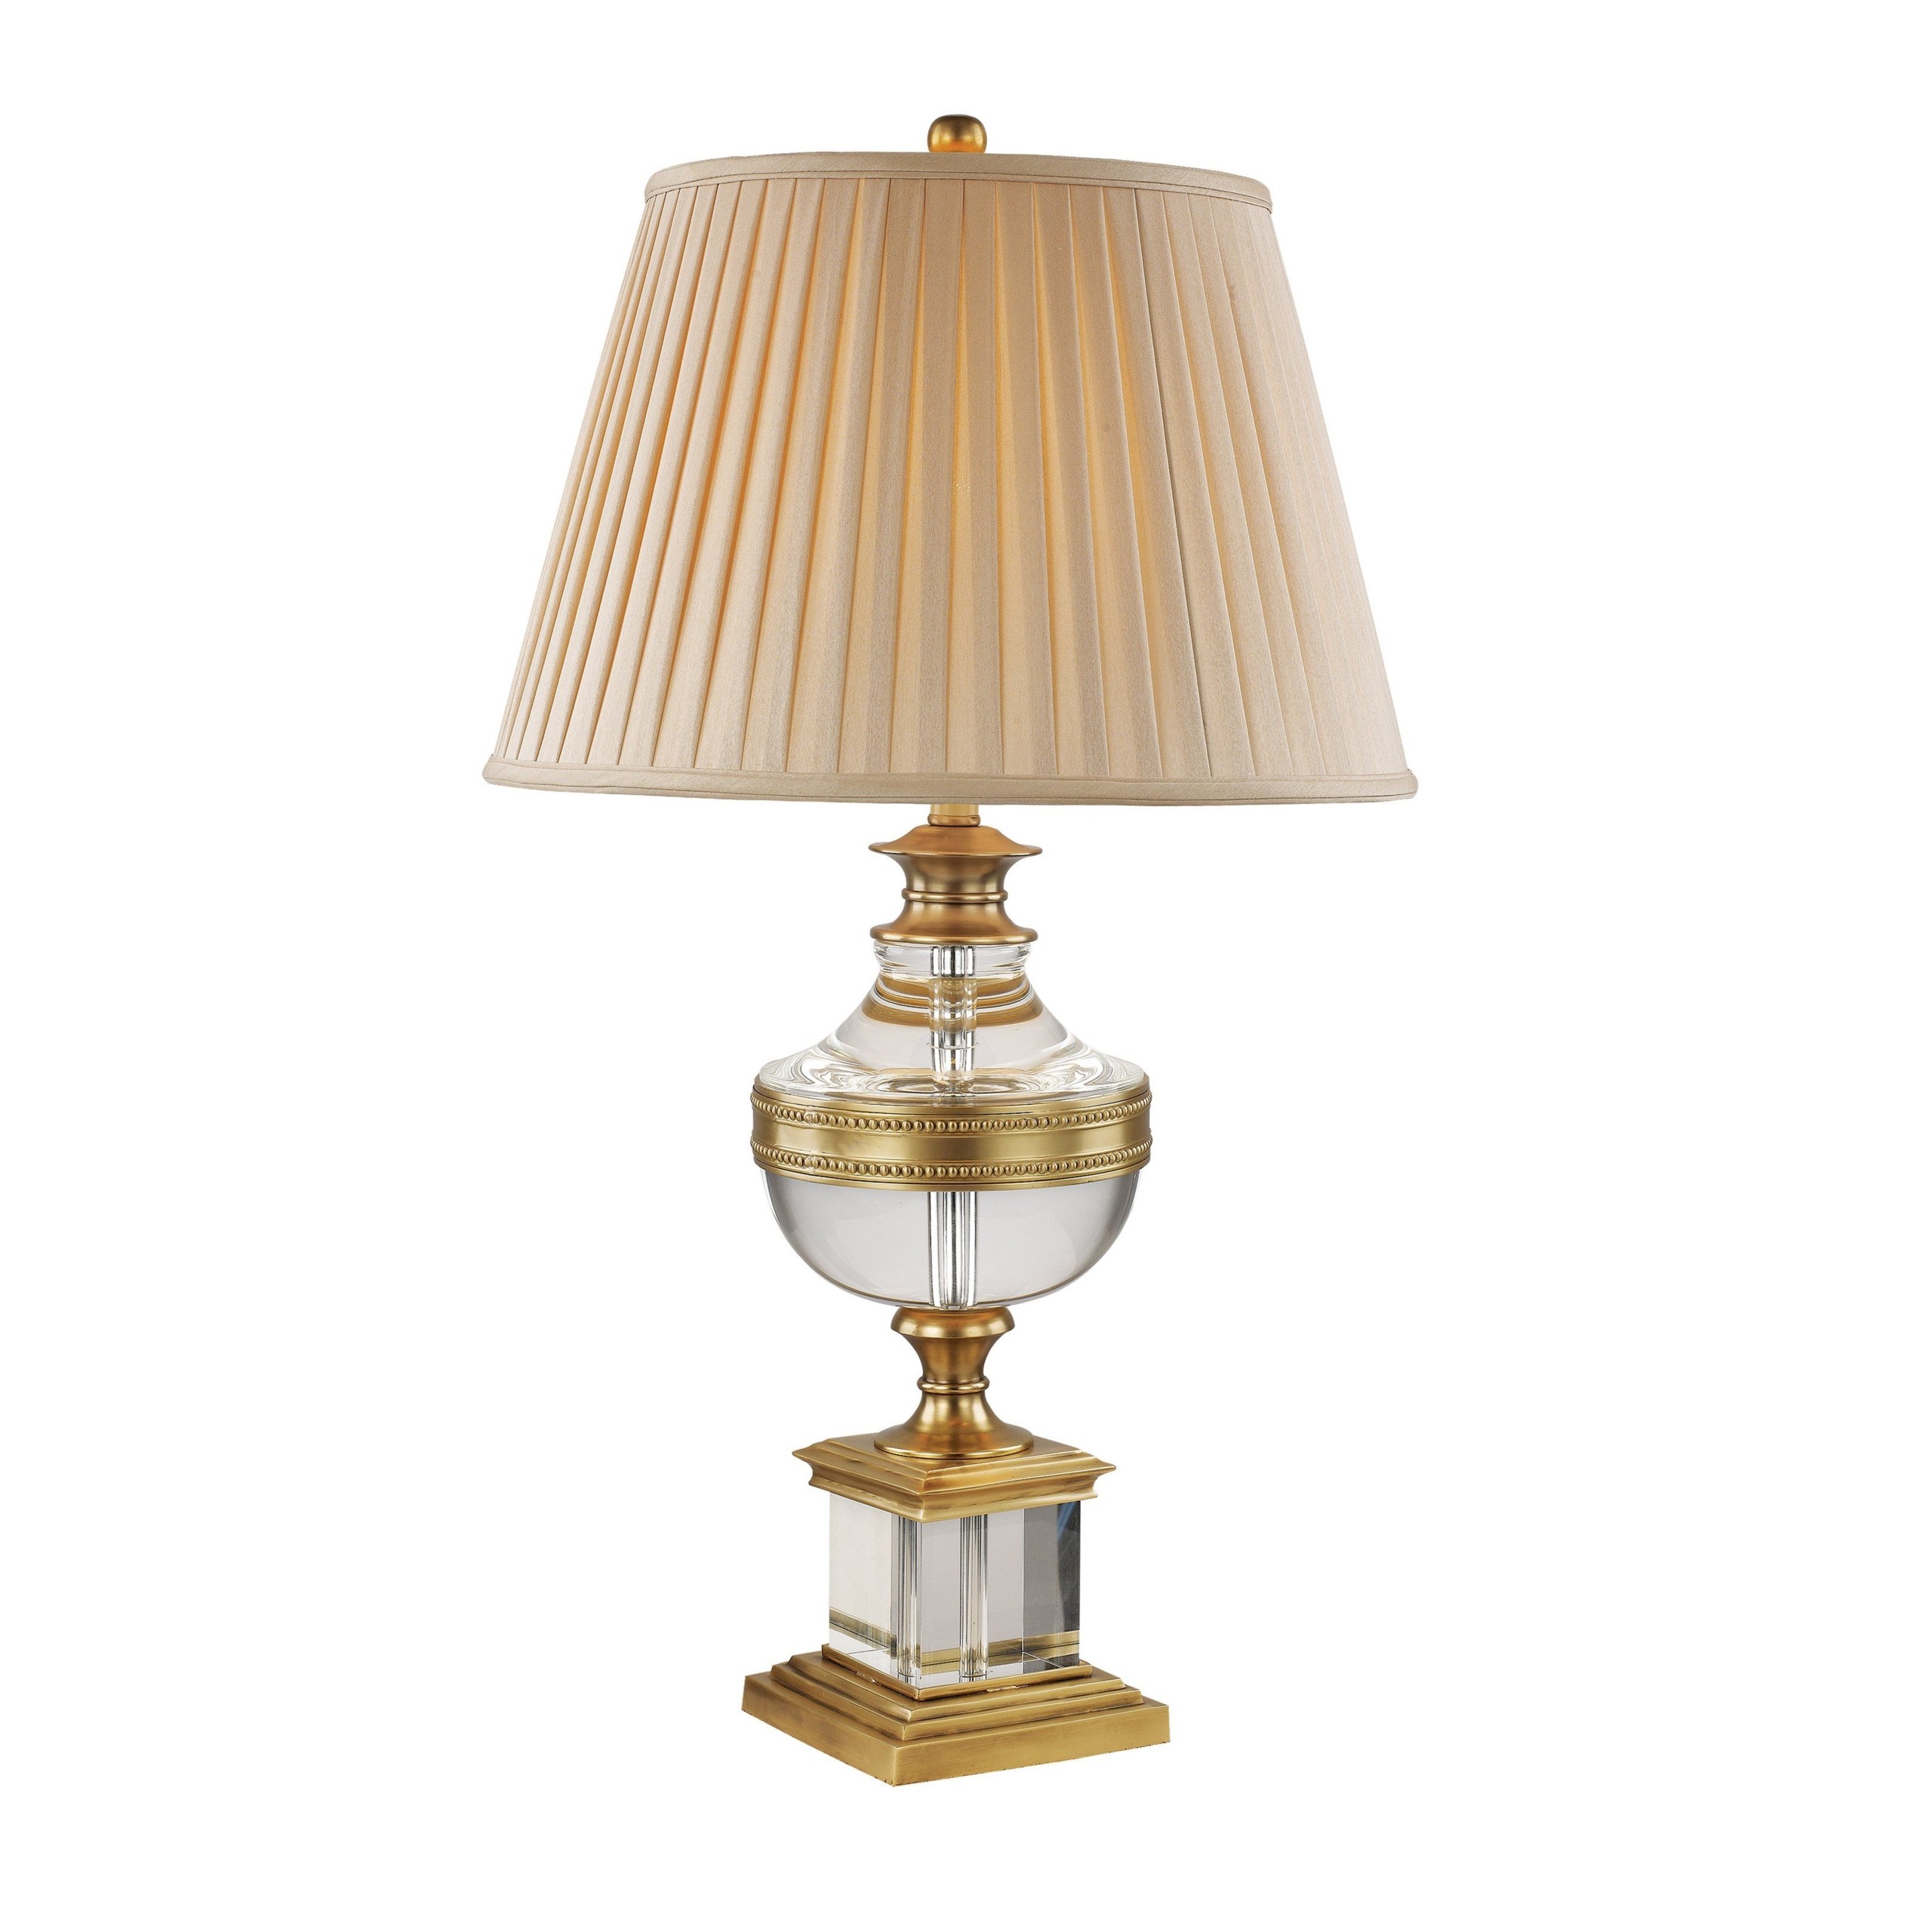 Trans Globe RTL-8813 Dynasty - 19" One Light Table Lamp, Antique Brass Finish with Solid Crystal